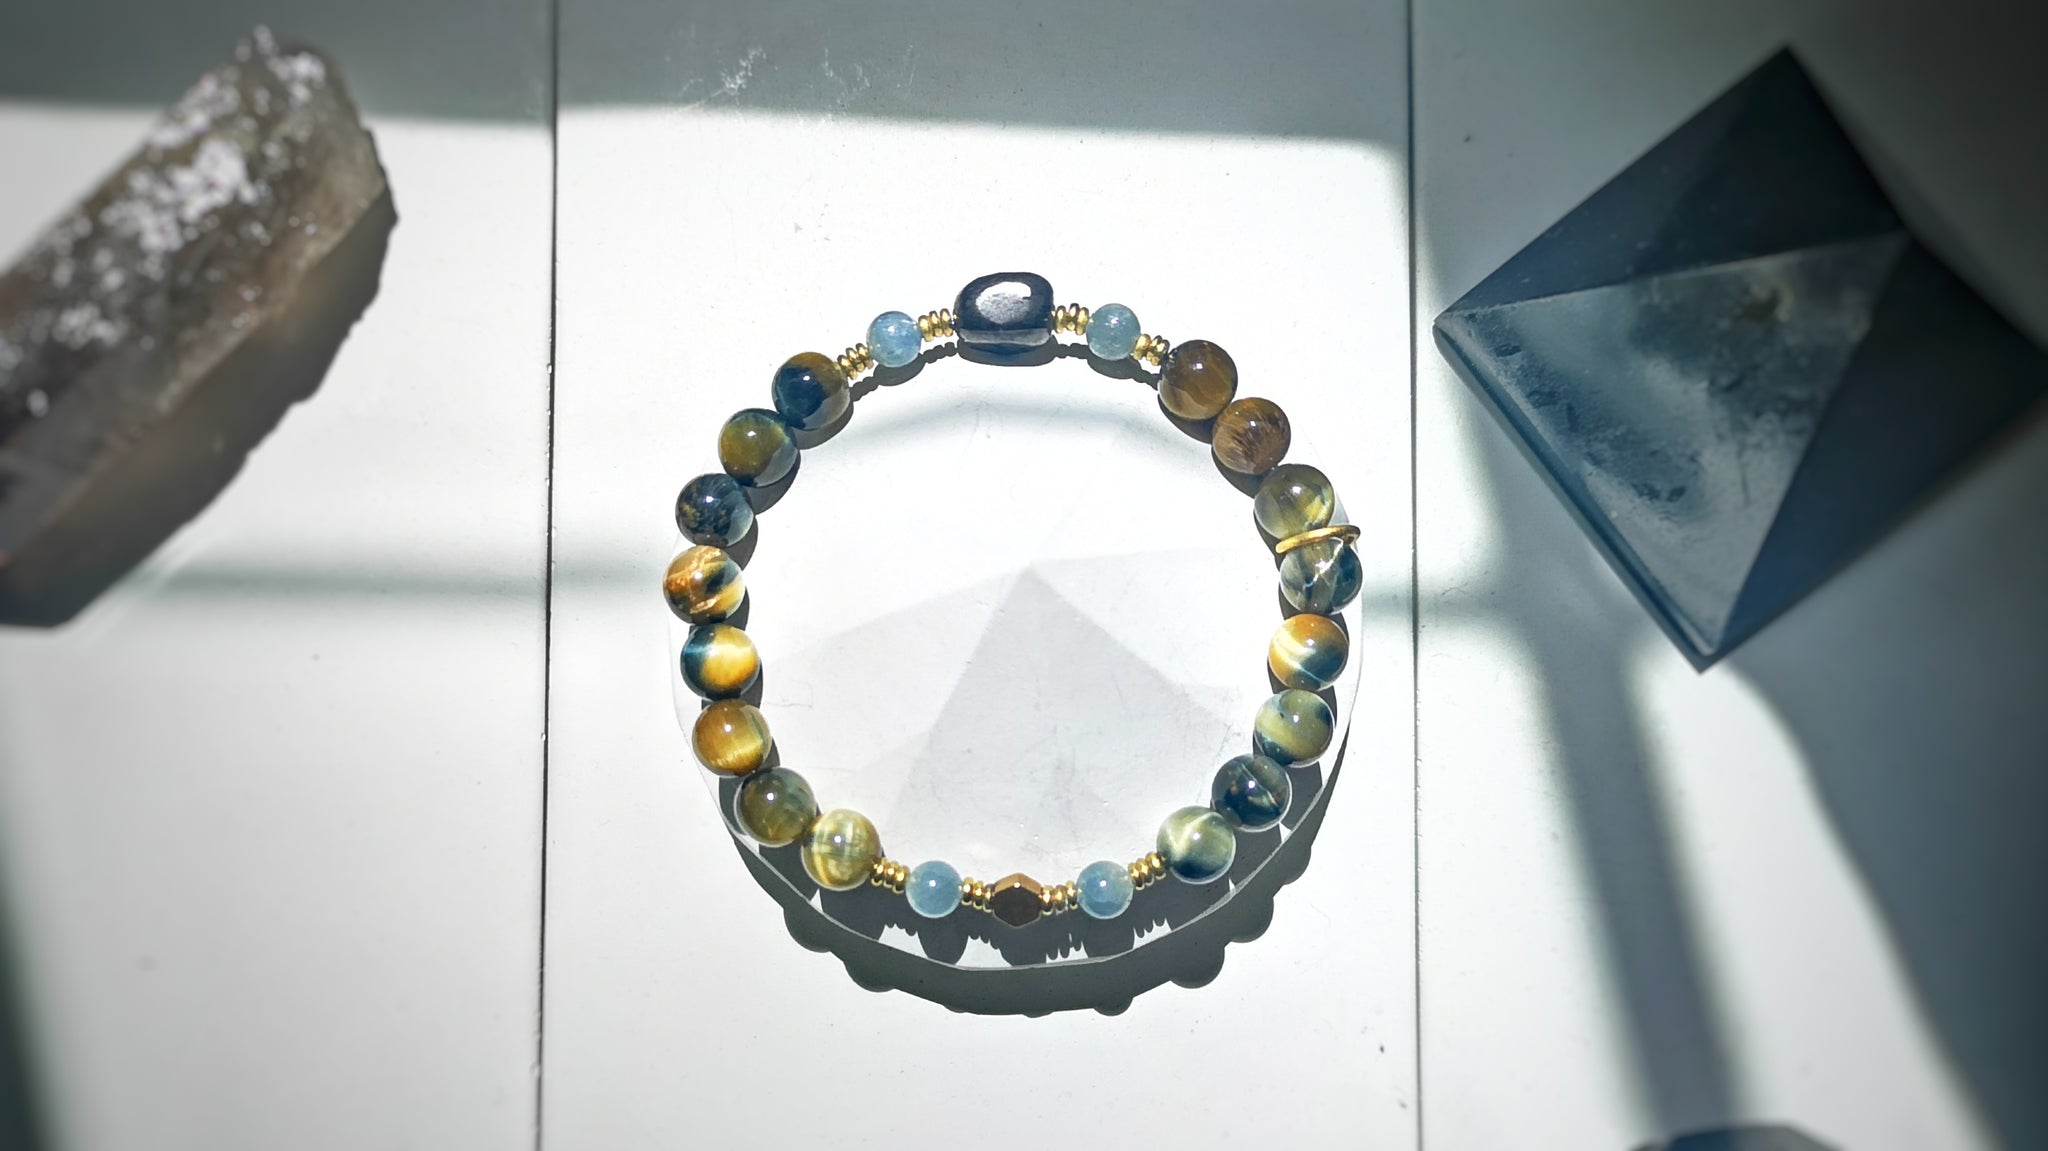 Find Focus Crystal Therapy Bracelet